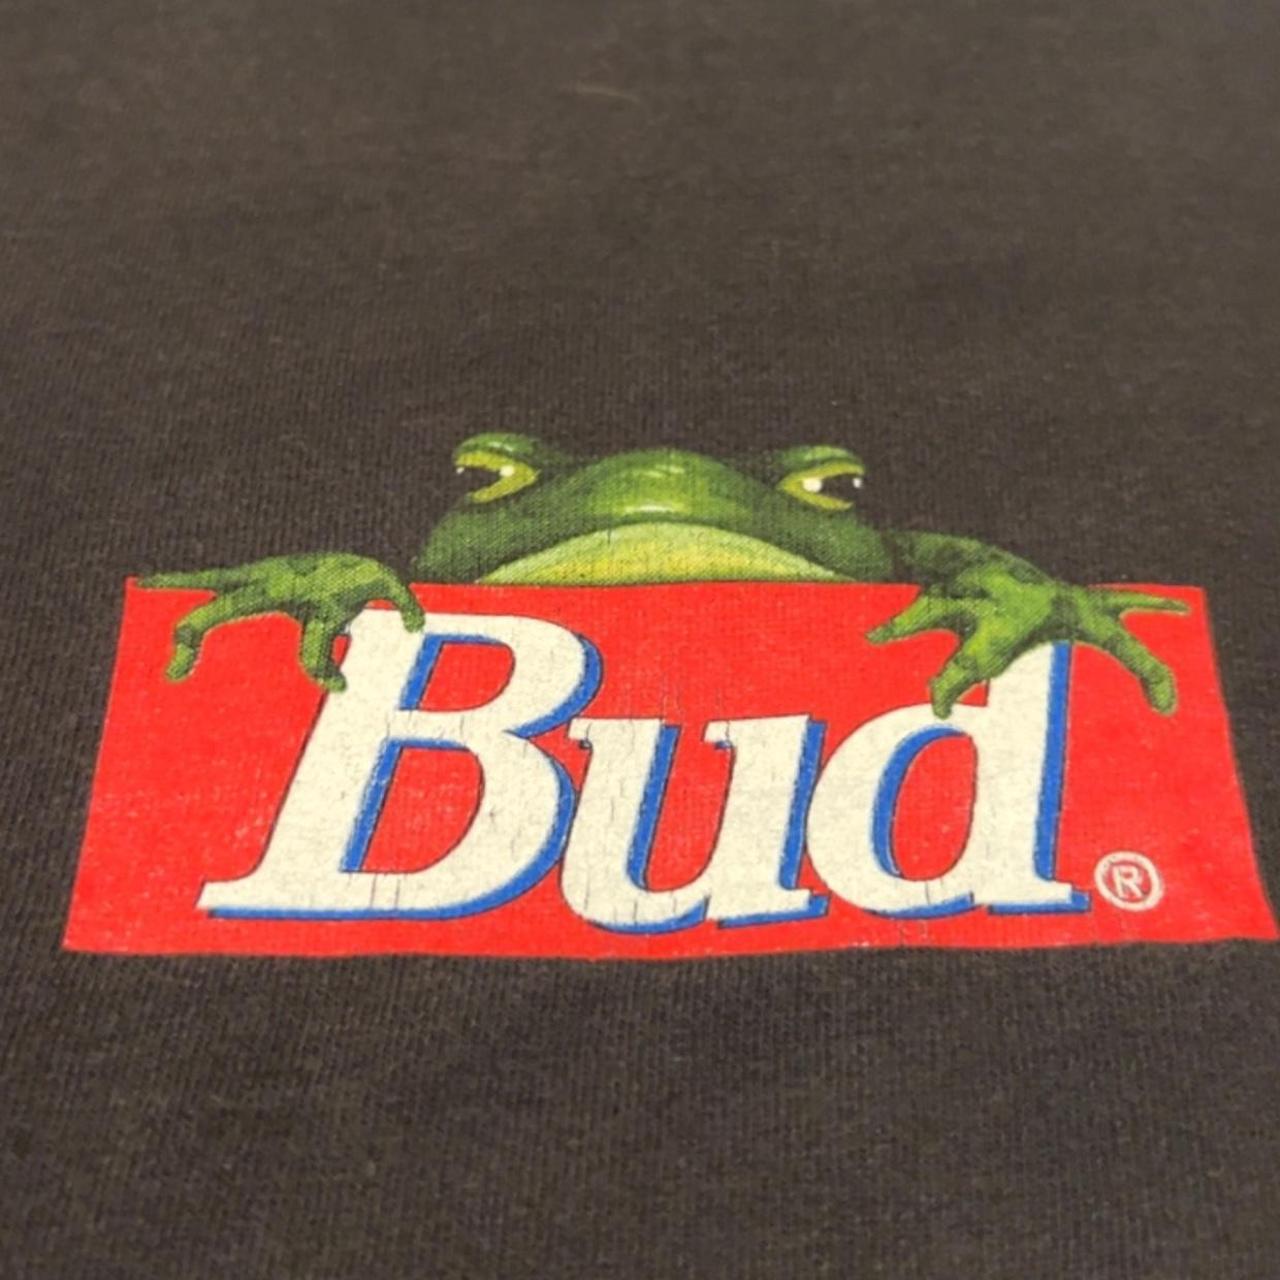 Vintage 90s Budweiser Come Over To My Pad T-Shirt - Depop